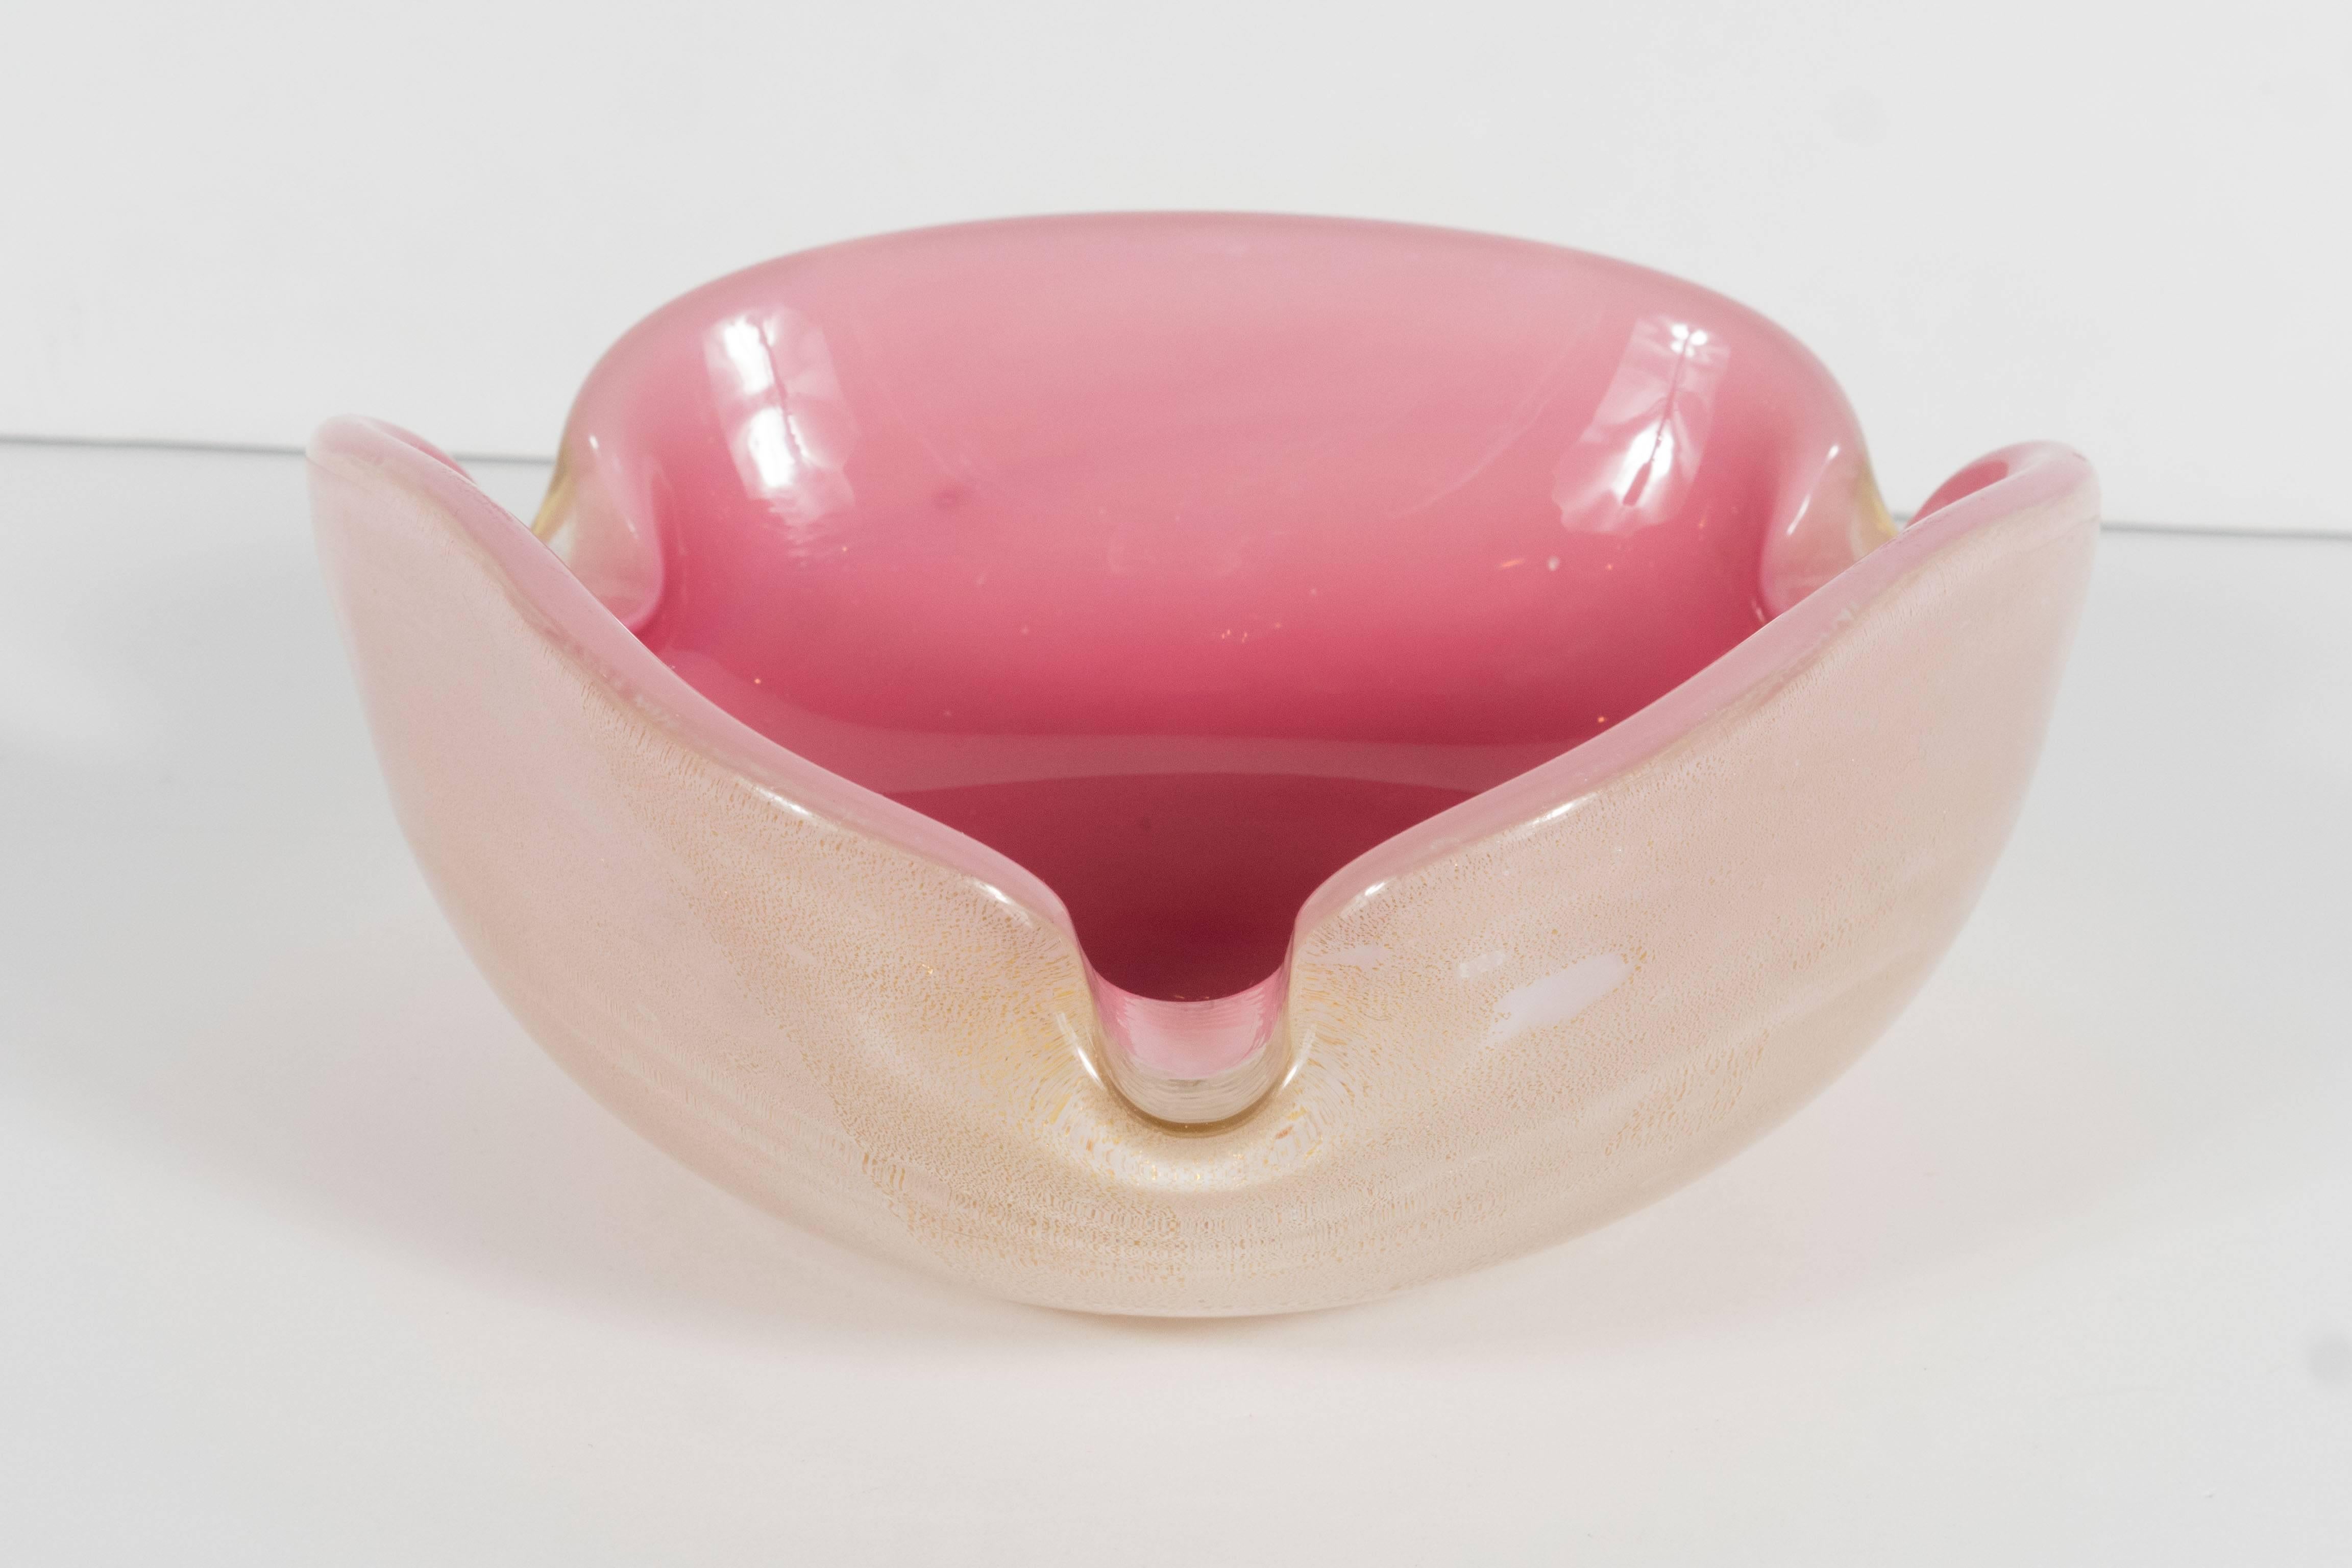 A handblown Murano three-sided glass ashtray. Its interior features a lovely gradient of rich pink in the center softening as it reaches the outer edges. The outer side of the bowl features swirls of 24-karat yellow gold. The exterior is a soft